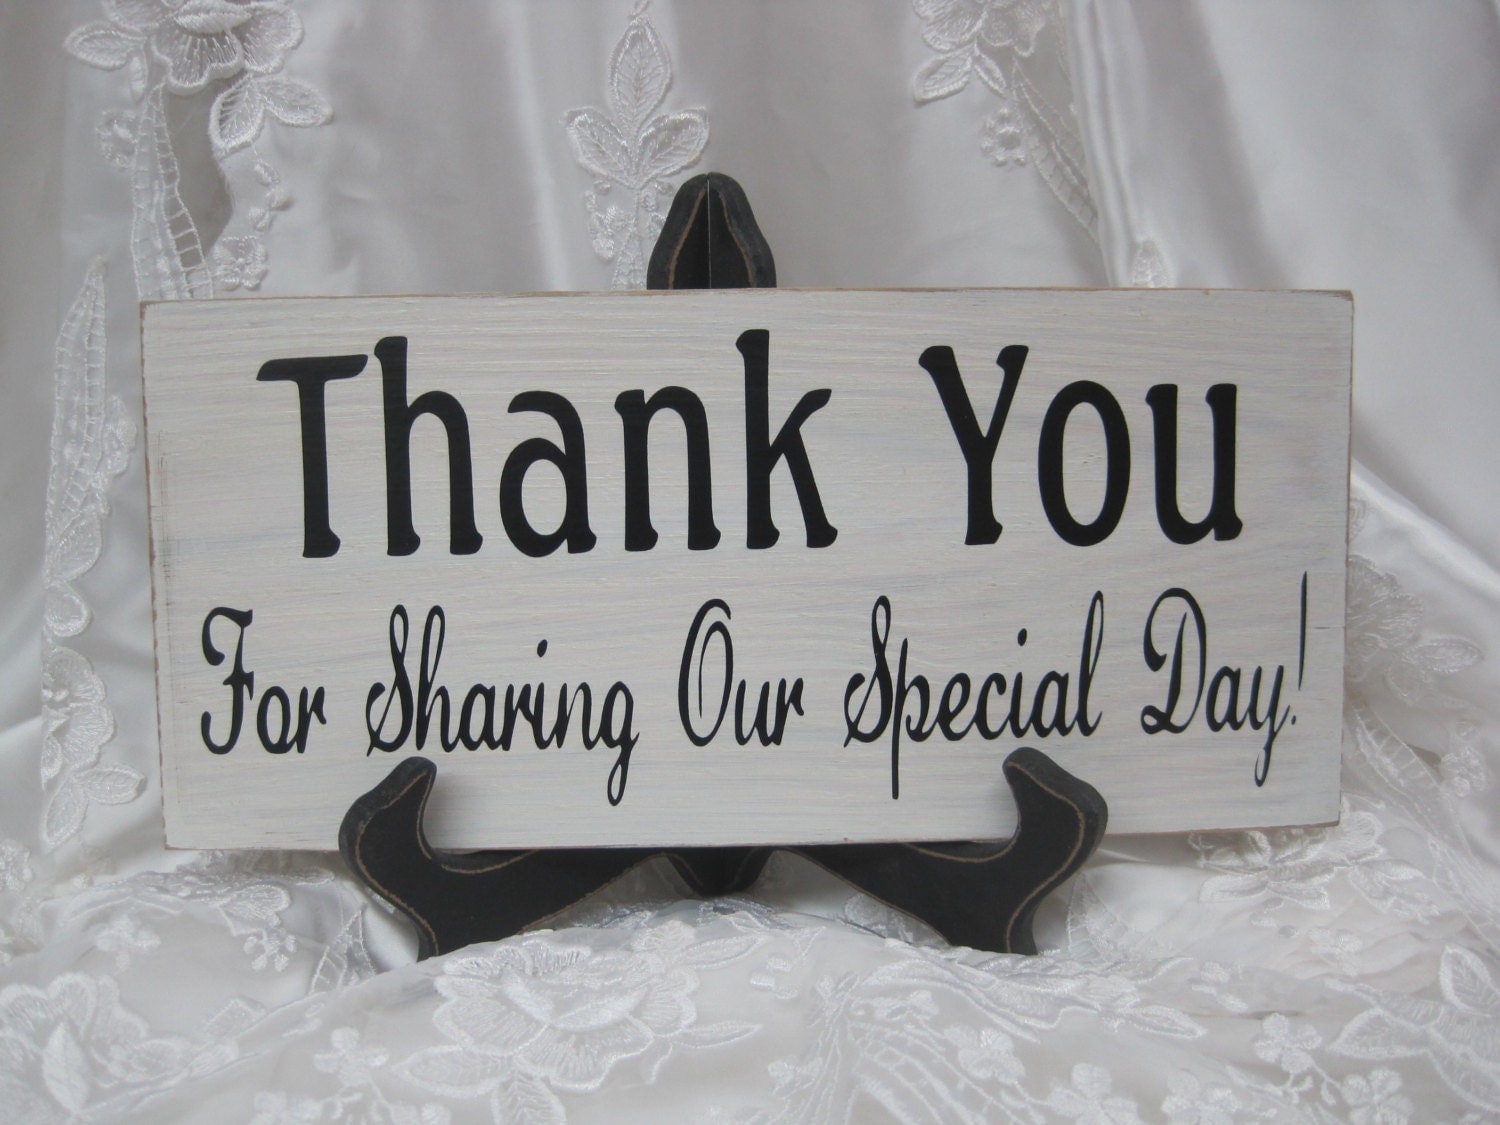 Rustic Wedding Sign Thank You for Sharing our Special Day Reception Gift Table Photo Prop Decoration Country Barn style Weddings